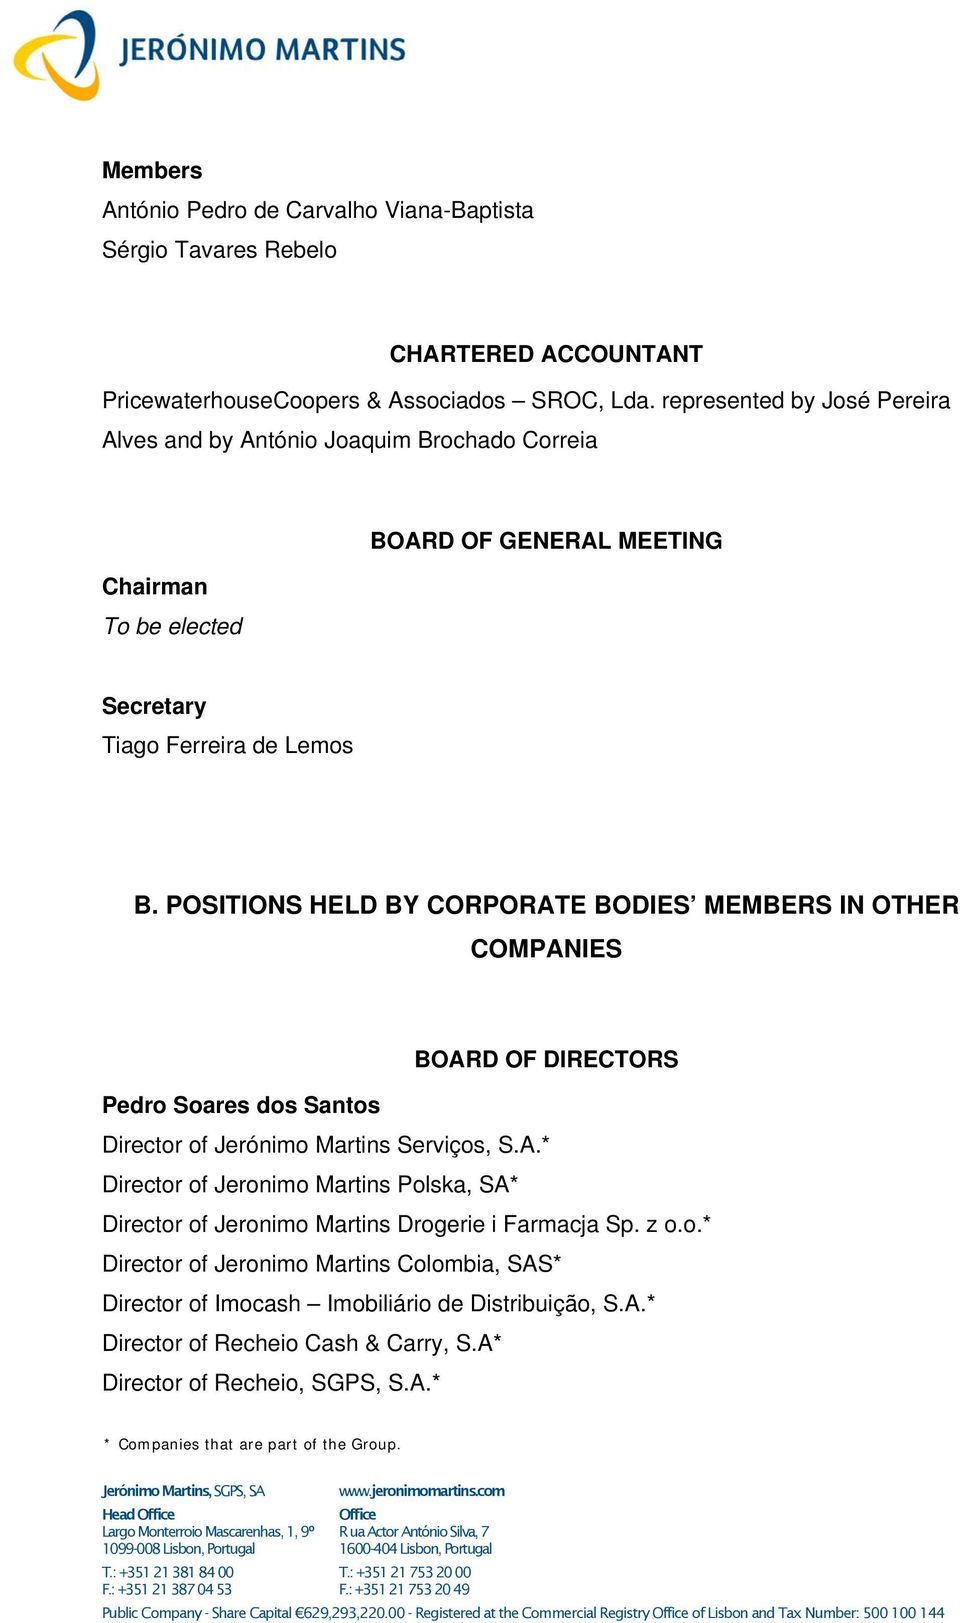 POSITIONS HELD BY CORPORATE BODIES MEMBERS IN OTHER COMPANIES BOARD OF DIRECTORS Pedro Soares dos Santos Director of Jerónimo Martins Serviços, S.A.* Director of Jeronimo Martins Polska, SA* Director of Jeronimo Martins Drogerie i Farmacja Sp.